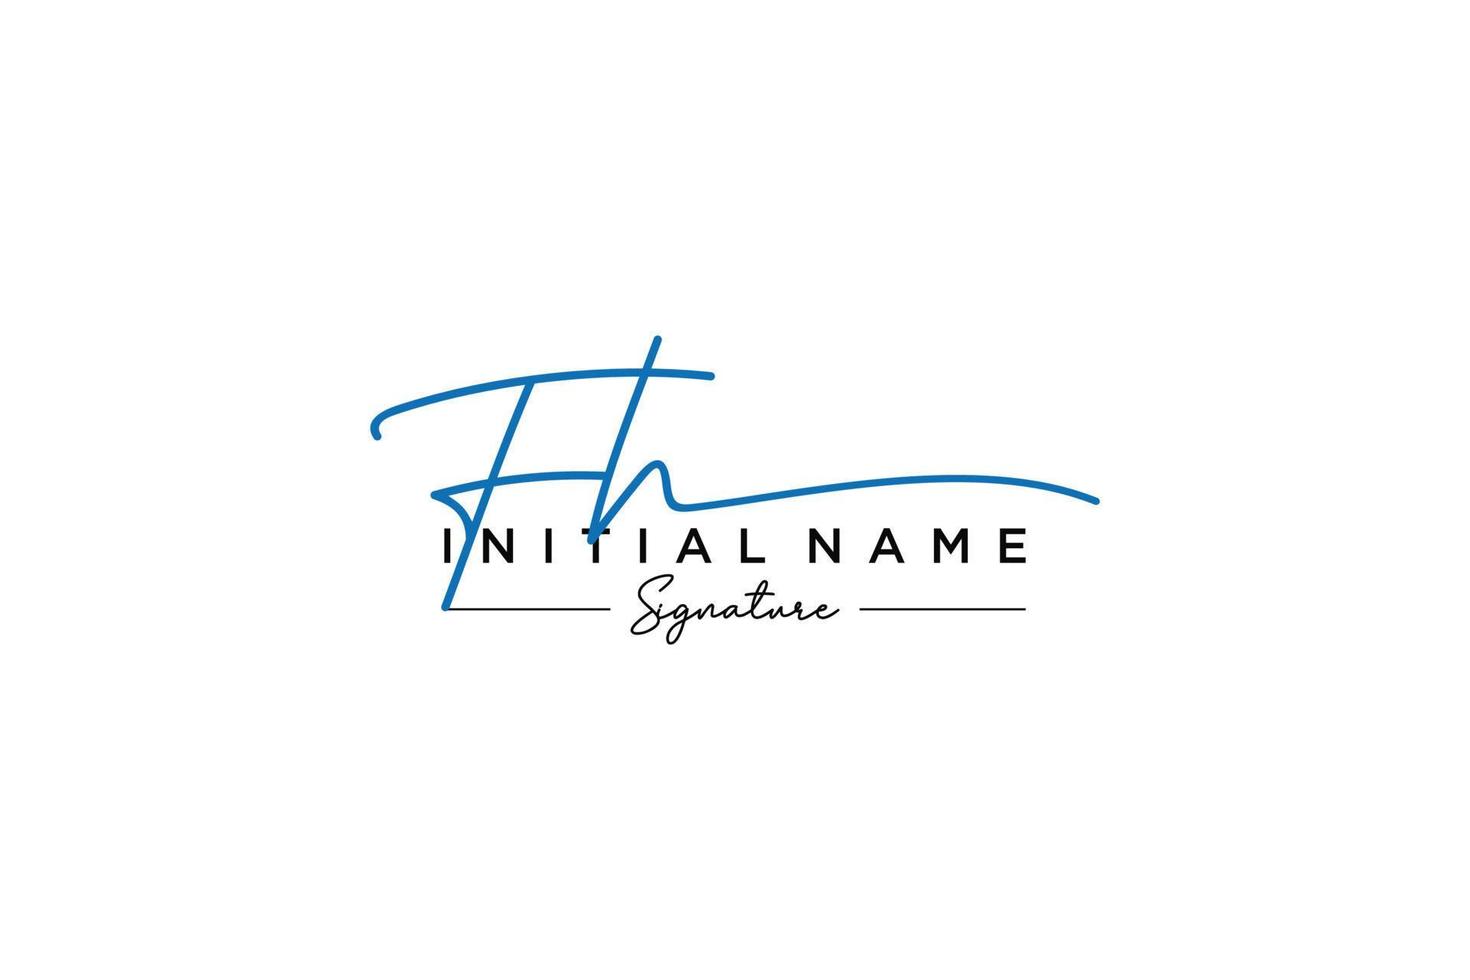 Initial FH signature logo template vector. Hand drawn Calligraphy lettering Vector illustration.